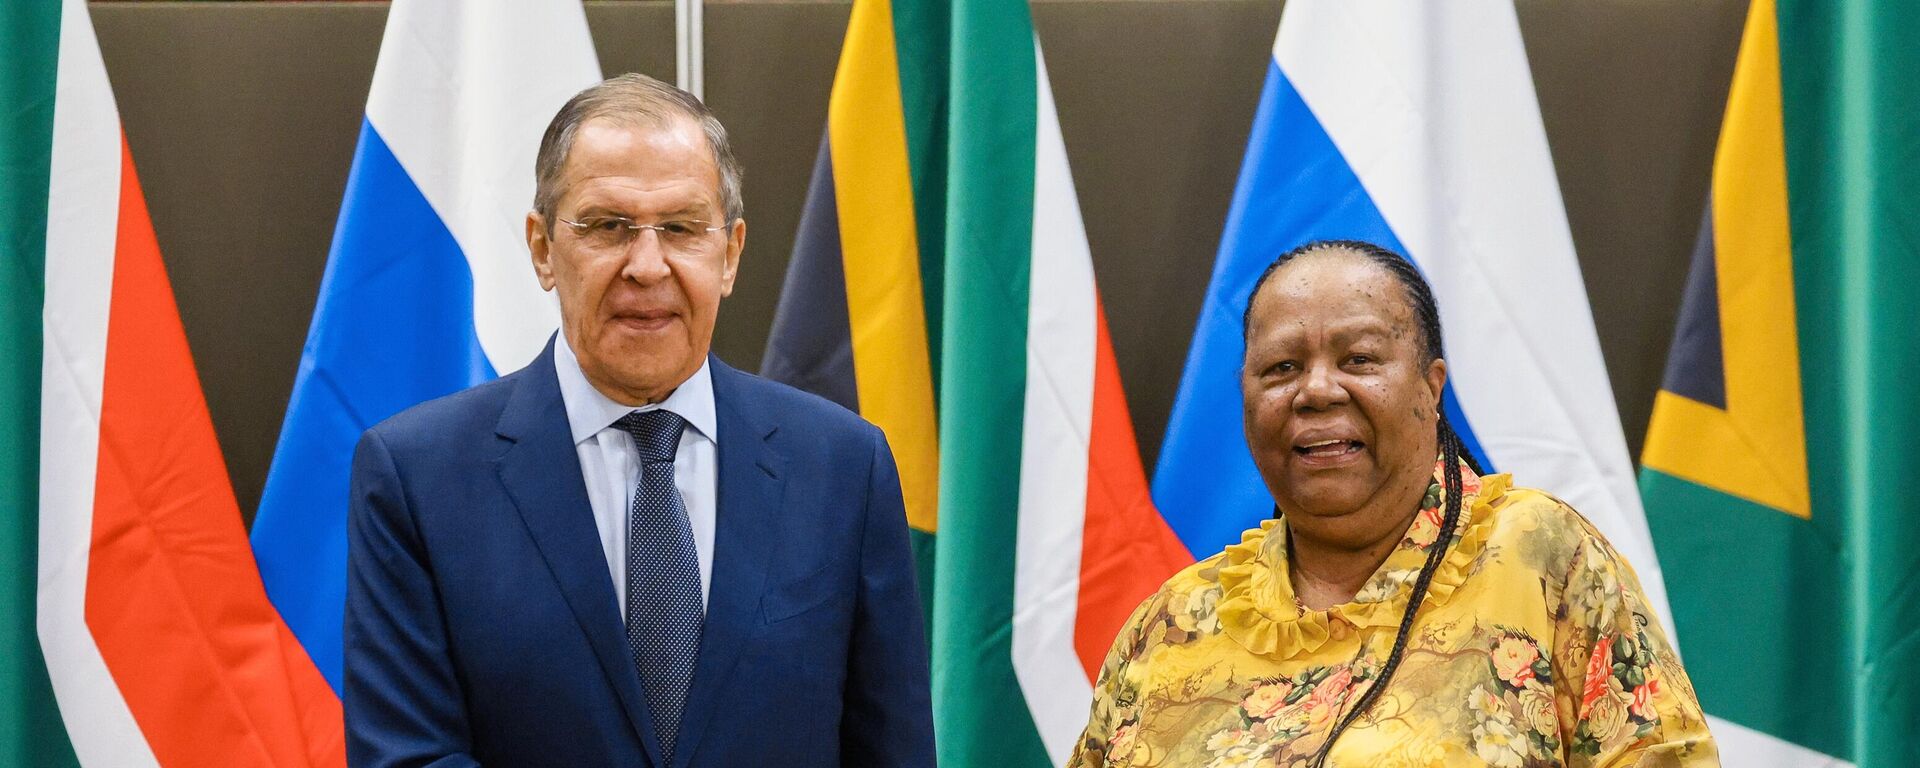 Russian Foreign Minister Sergey Lavrov and Minister of Foreign Affairs of South Africa Naledi Pandor during a joint press conference following a meeting in Pretoria, South Africa, on Monday, Jan. 23, 2023. - Sputnik International, 1920, 27.01.2023